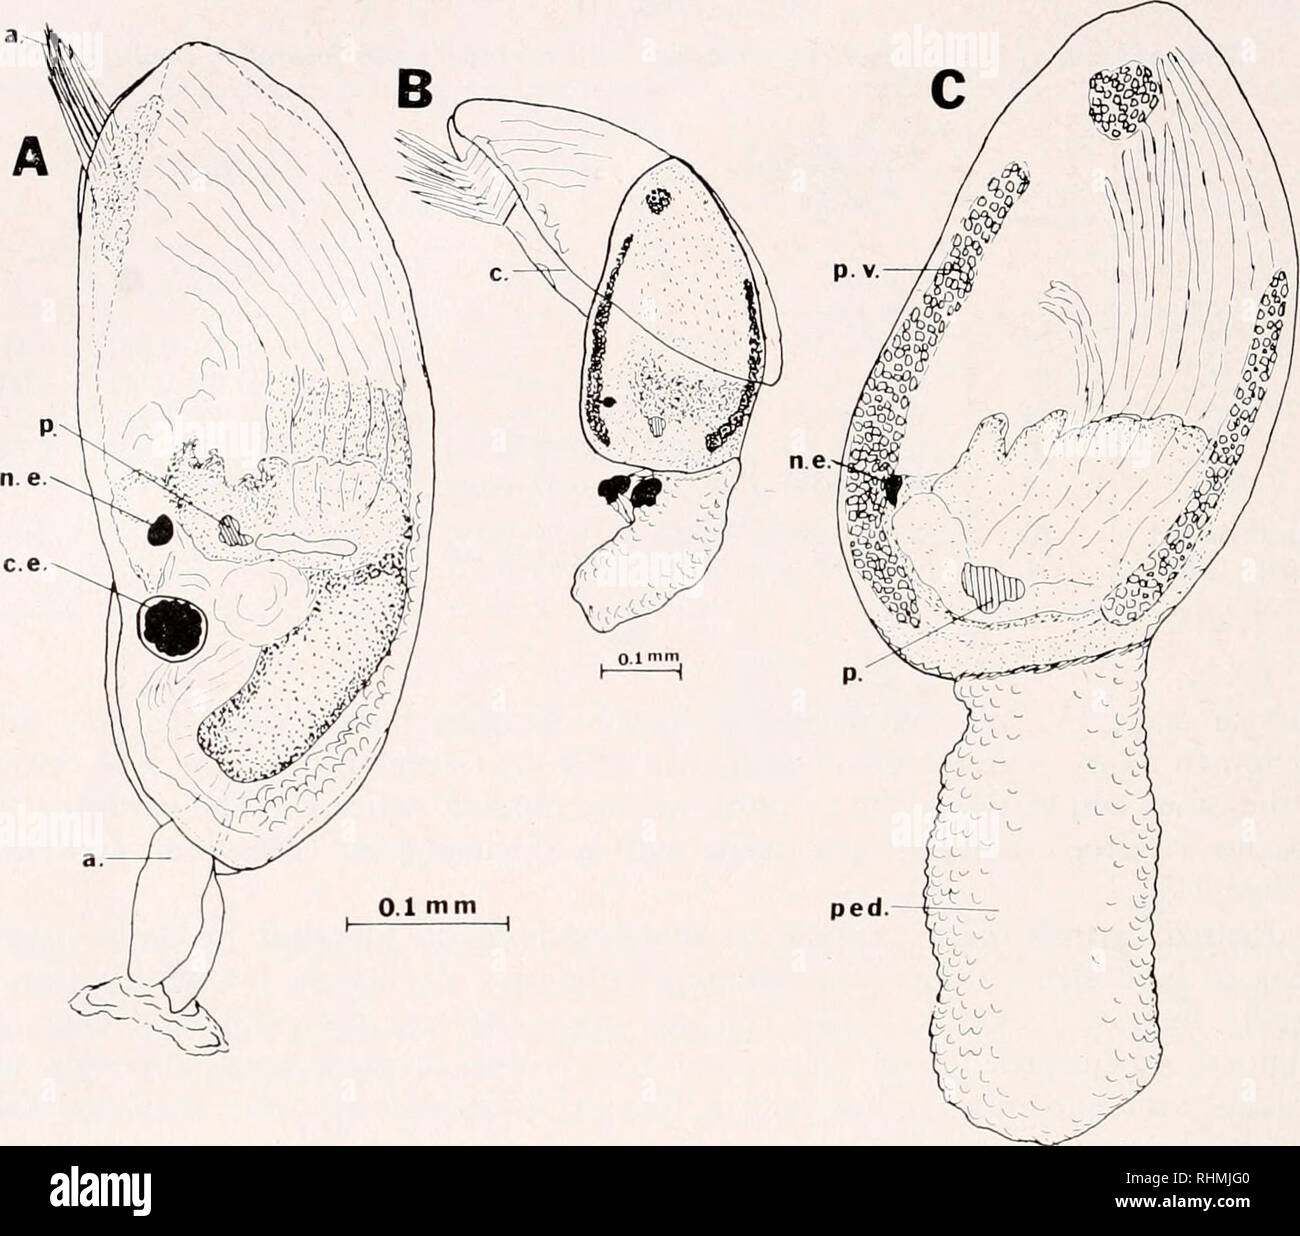 . The Biological bulletin. Biology; Zoology; Biology; Marine Biology. 264 WILLIAM H. LANG n. a.. FIGURE 8. A. Cyprid of Octnlasiitis ini'illcri recovered from blue crab gill 16 hours after exposure. Prominent features include the cemented antennules (a.), compound eye (c.e.), natatory appendages (n.a.), nauplius eye (n.e.) and orange pigment spot (p.)- B. By 36 hours after recovery the cyprid carapace (c.) is nearly shed. C. The newly emerged juvenile barnacle still retains the nauplius eye (n.e.) and pigment spot (p.). Primordial valves (p.v.) and expanded peduncle (ped.) are evident. opaque. Stock Photo